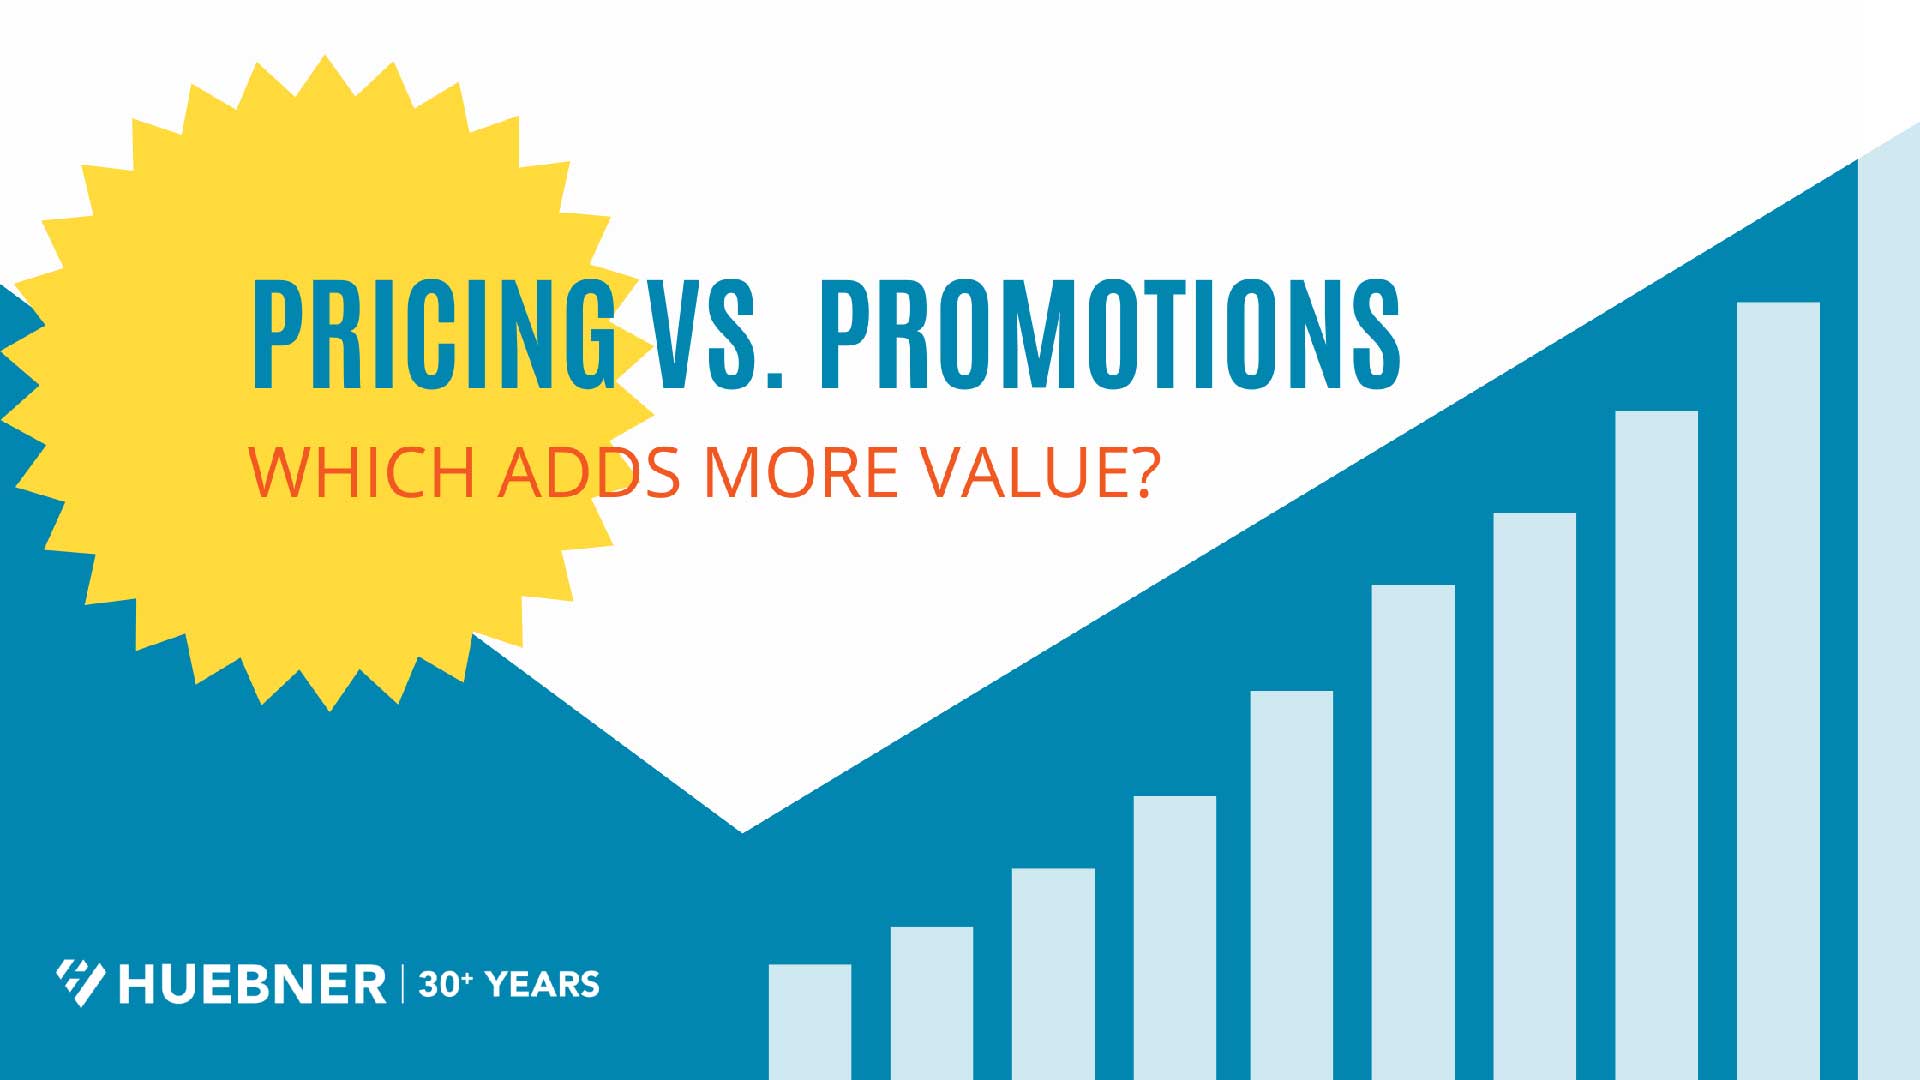 Pricing vs. Promotions: Which Adds More Value to Your Brand?